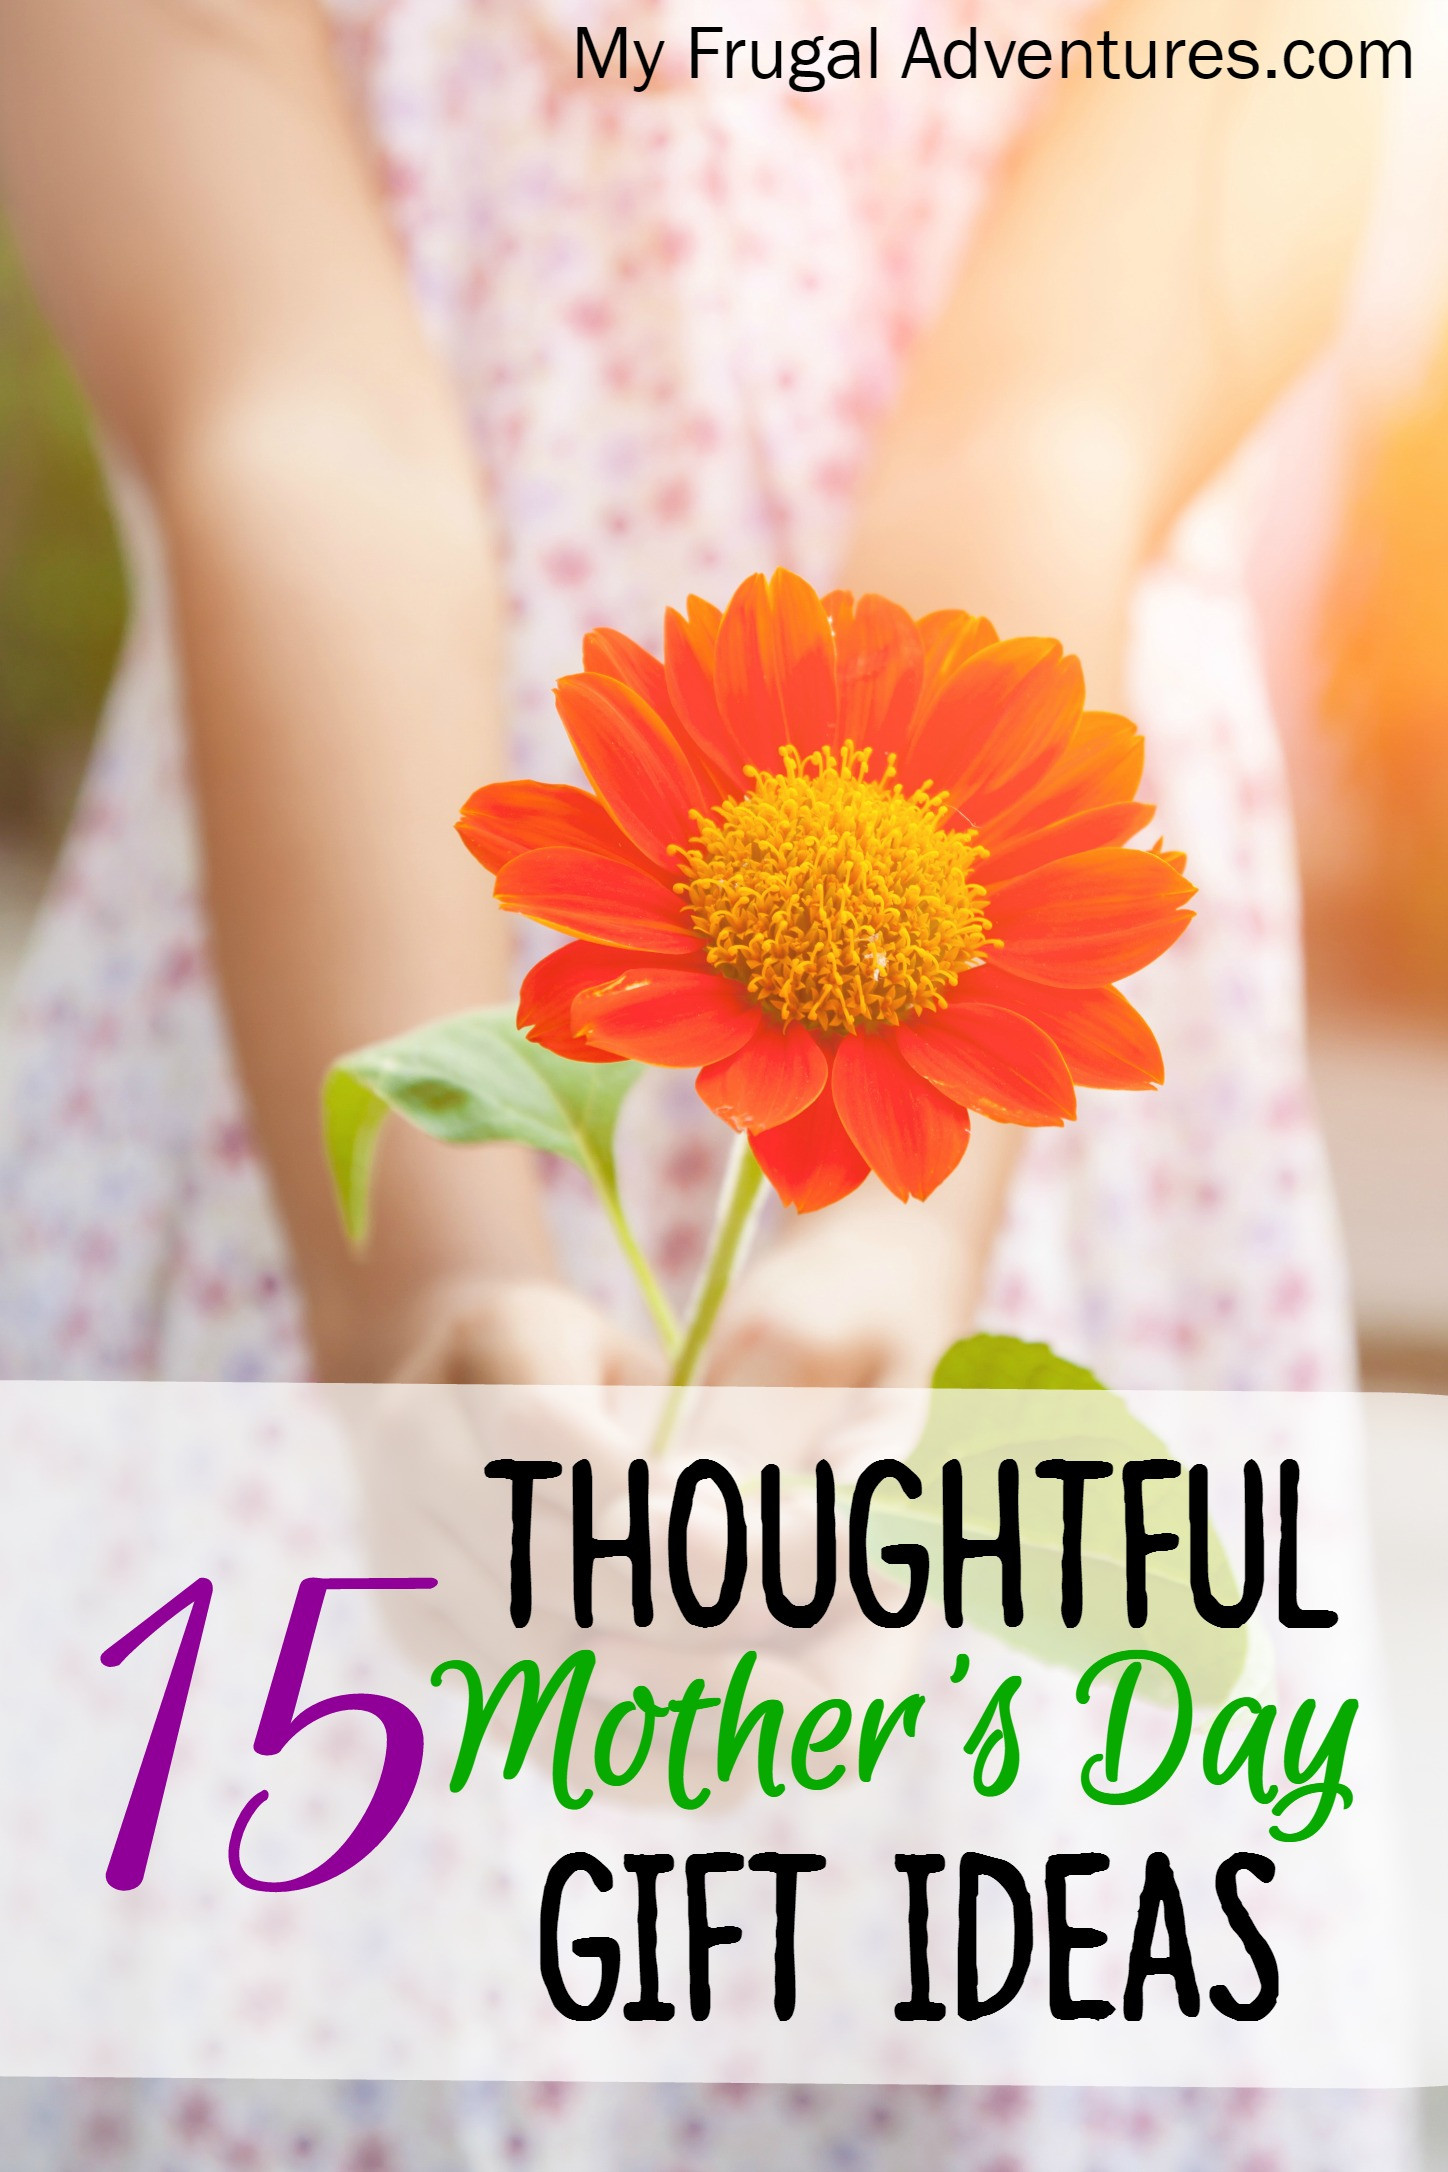 Amazon Mothers Day Gift Ideas
 15 Thoughtful Mother s Day Gift Ideas My Frugal Adventures